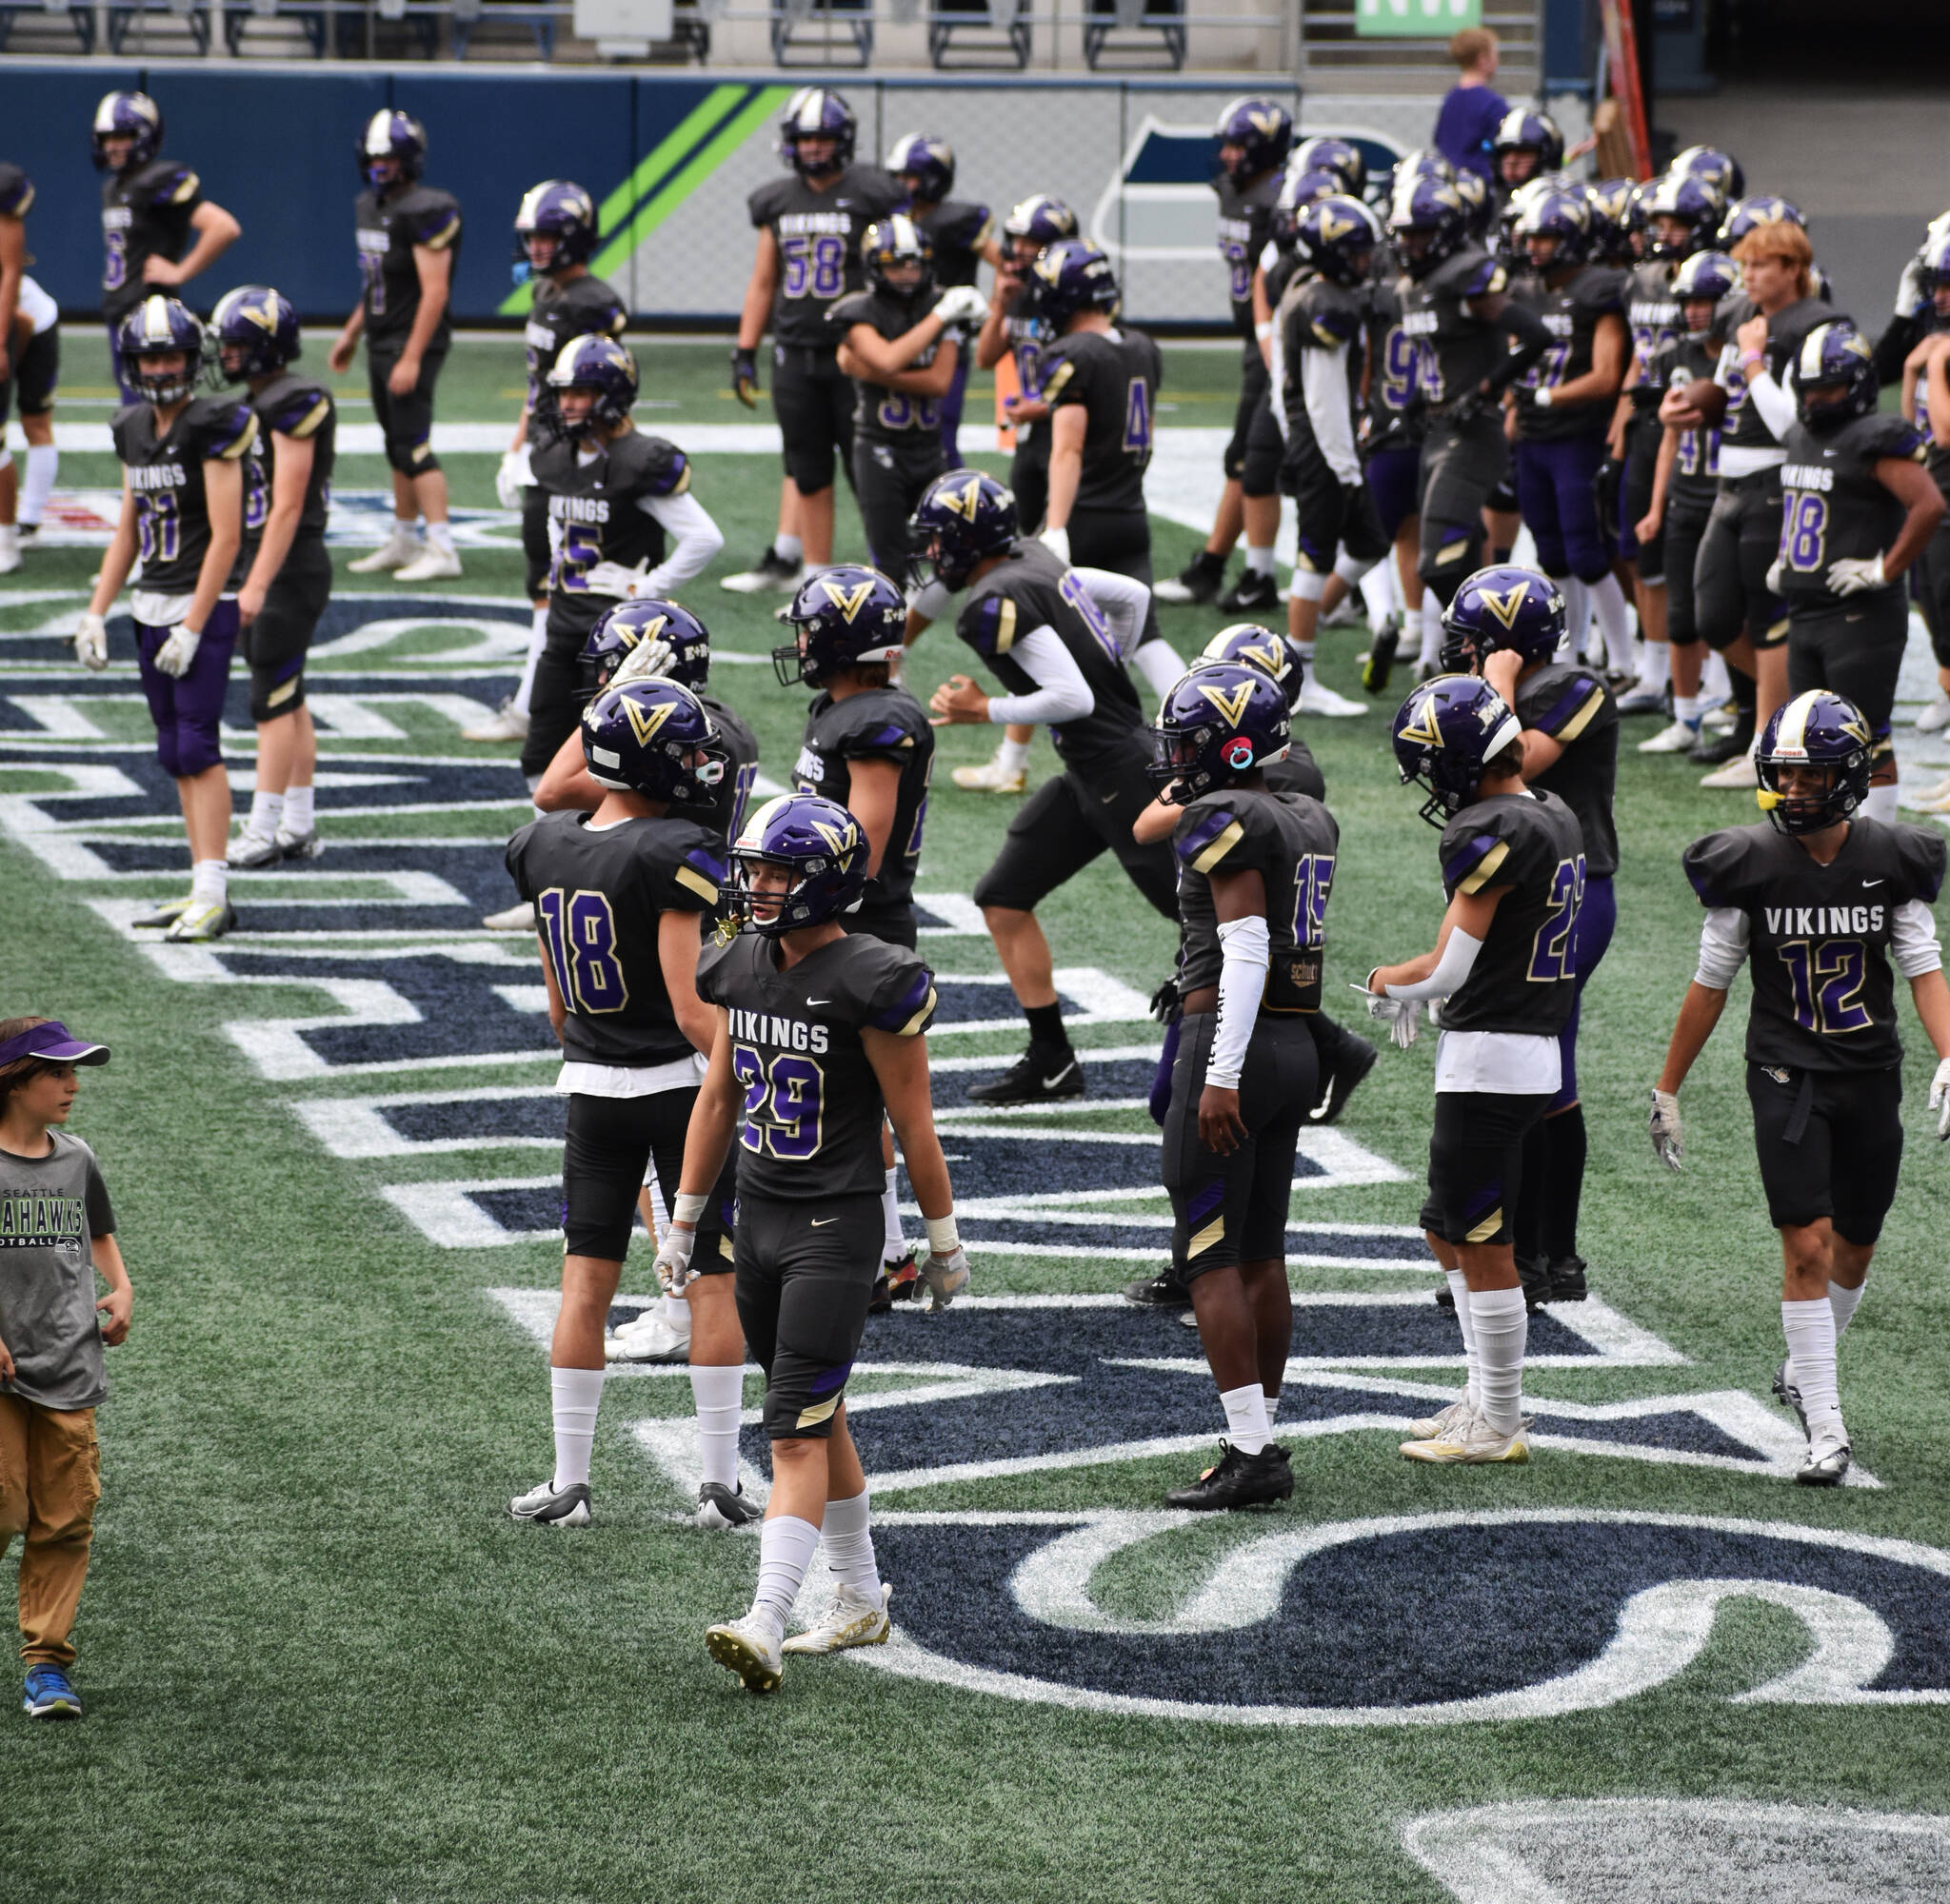 North Kitsap began running drills in the Seahawks’ end zone before playing against Port Angeles at Lumen Field. Nicholas Zeller-Singh/Kitsap News Group